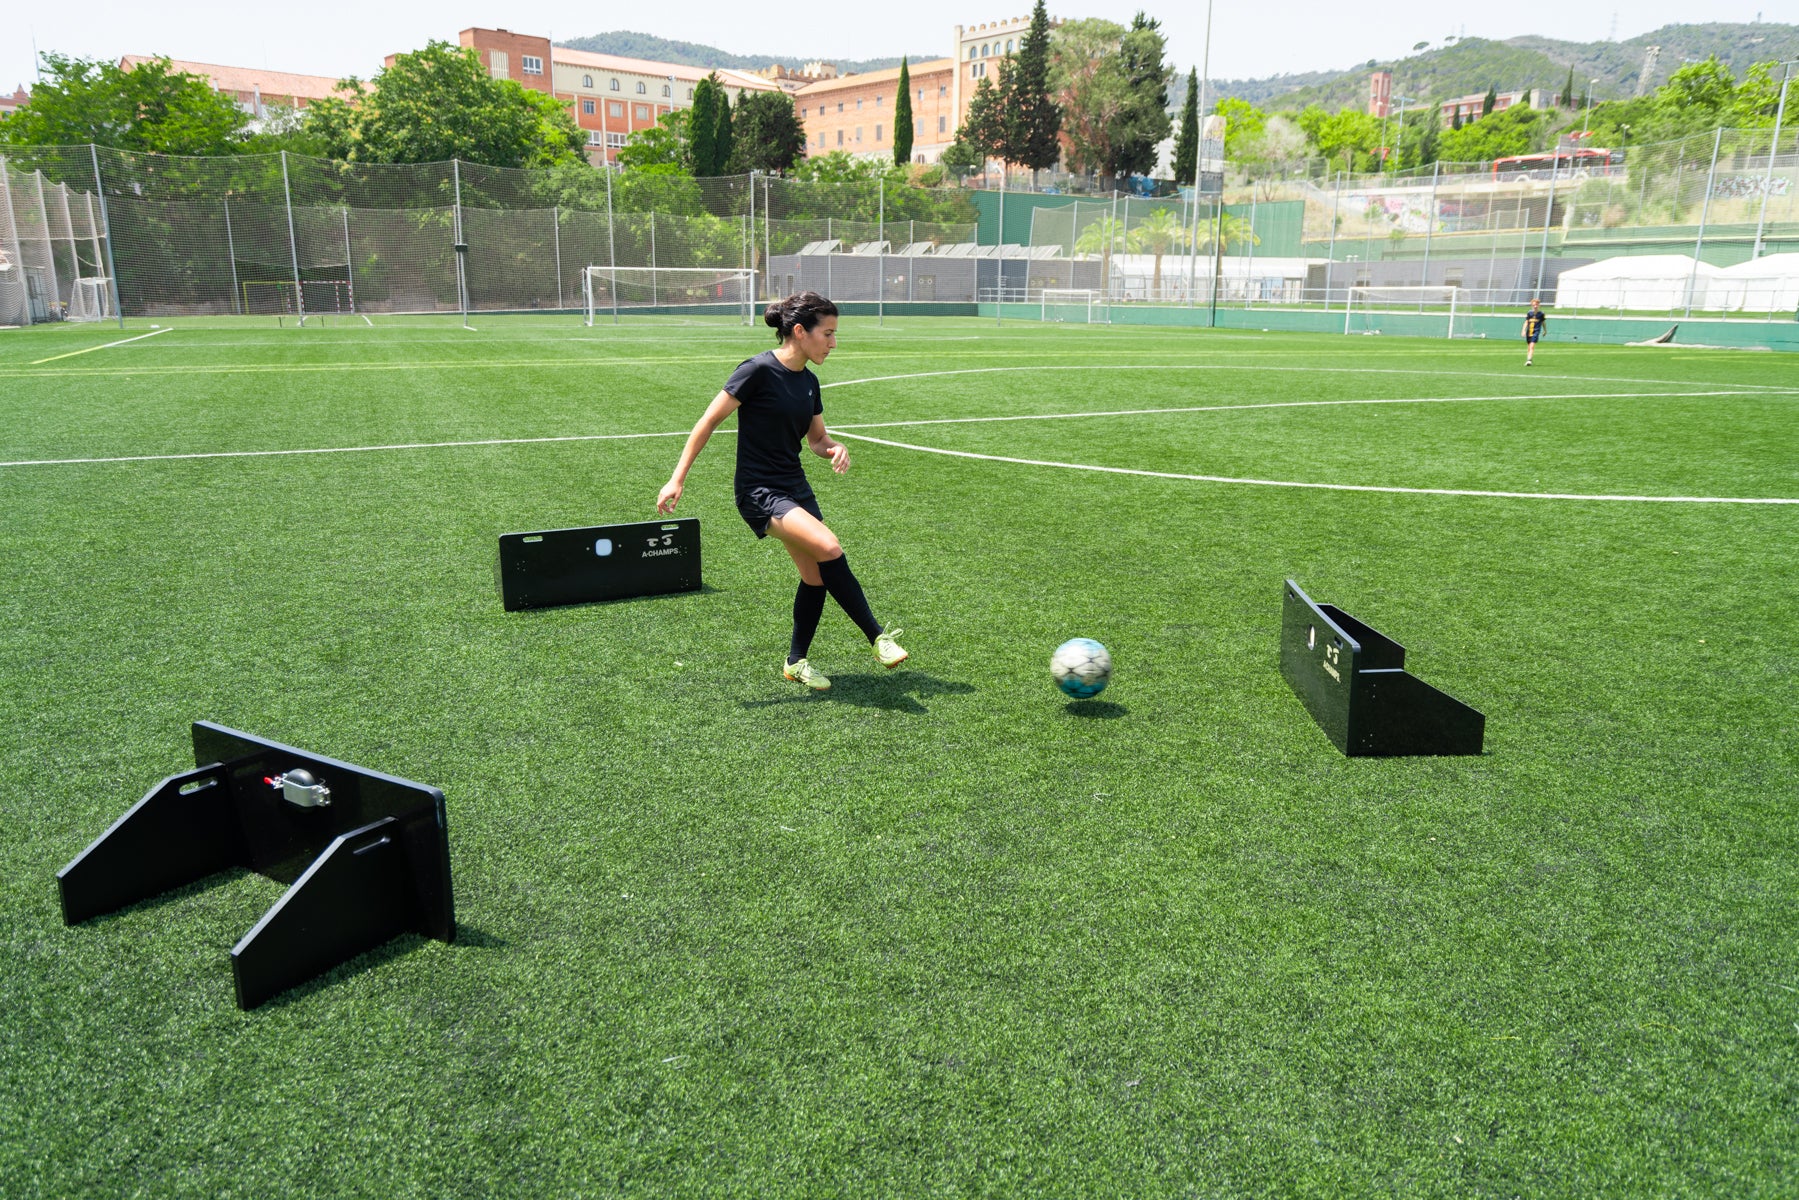 A woman is actively playing soccer on a lush green artificial turf field, dribbling a soccer ball with focus and intent. There are three rebounders on the field with a ROX on each of them, suggesting a training drill setup. The background features a clear sky and a hilly landscape with trees and buildings, indicating the field is located in a scenic, urban area.